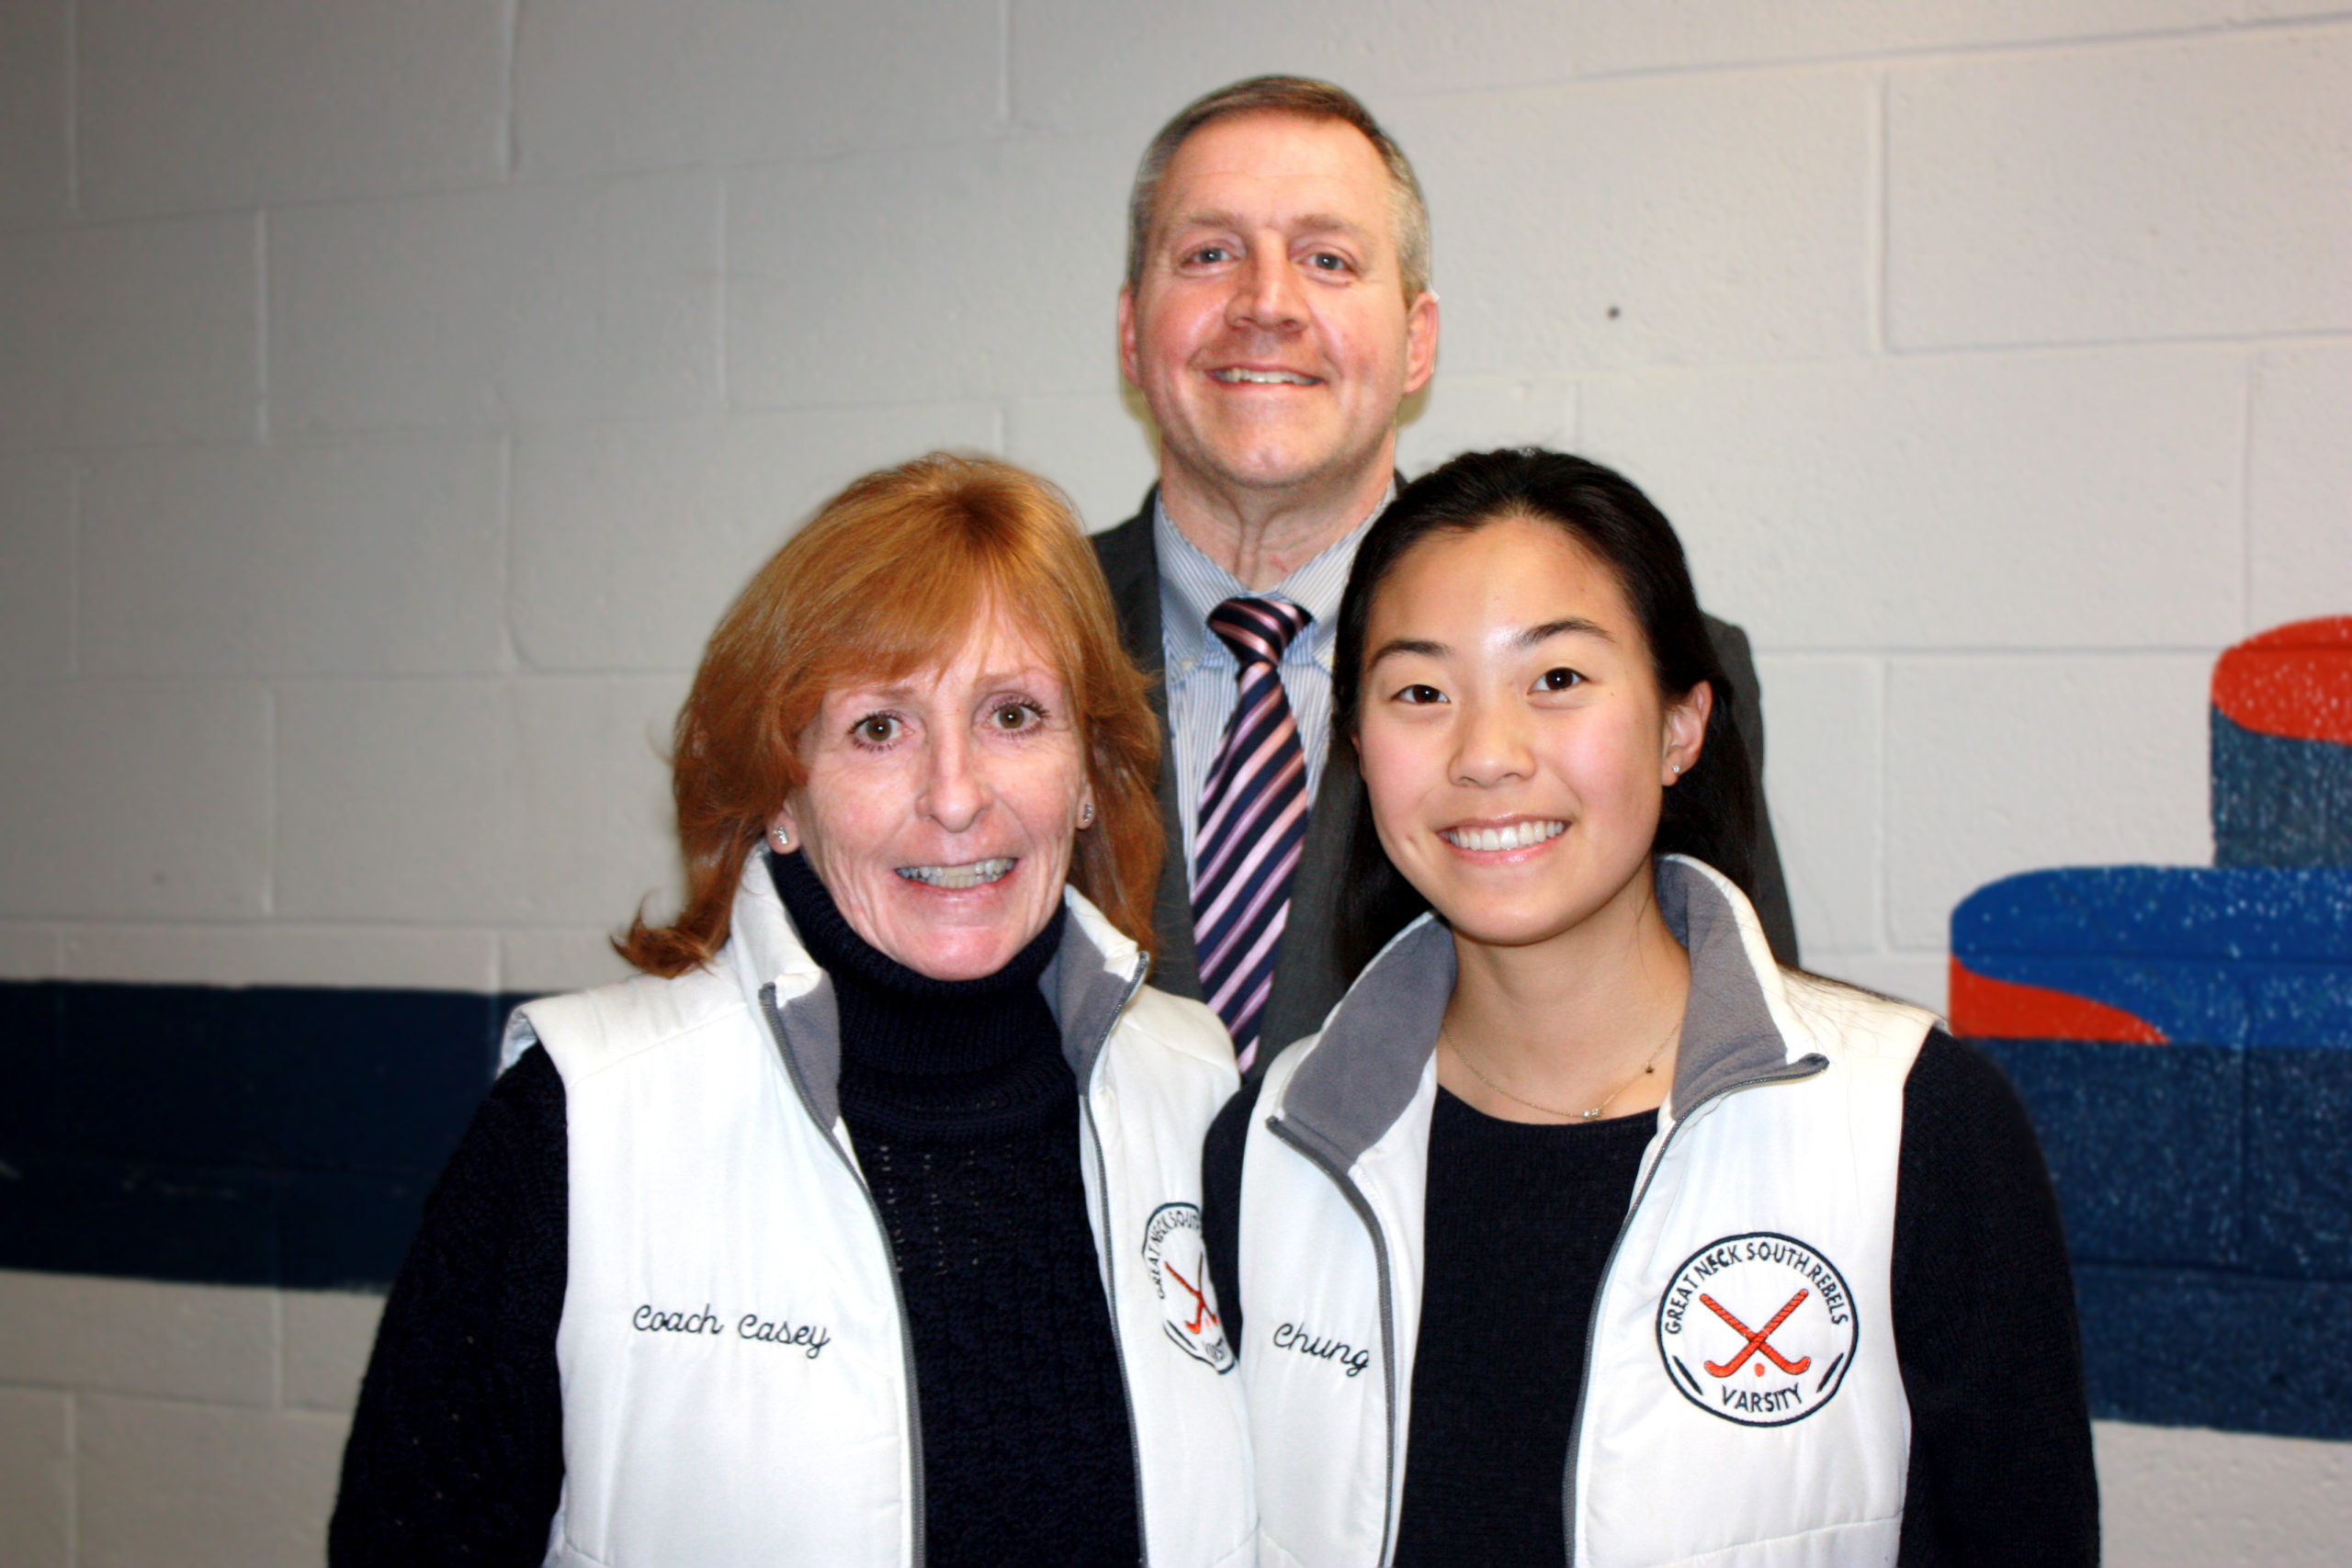 Great Neck South senior Glory Chung is congratulated by Tara Rosenthal, coach of the field hockey team, and Dr. Christopher Gitz, principal of Great Neck South. (Photo courtesy of Great Neck Public Schools)